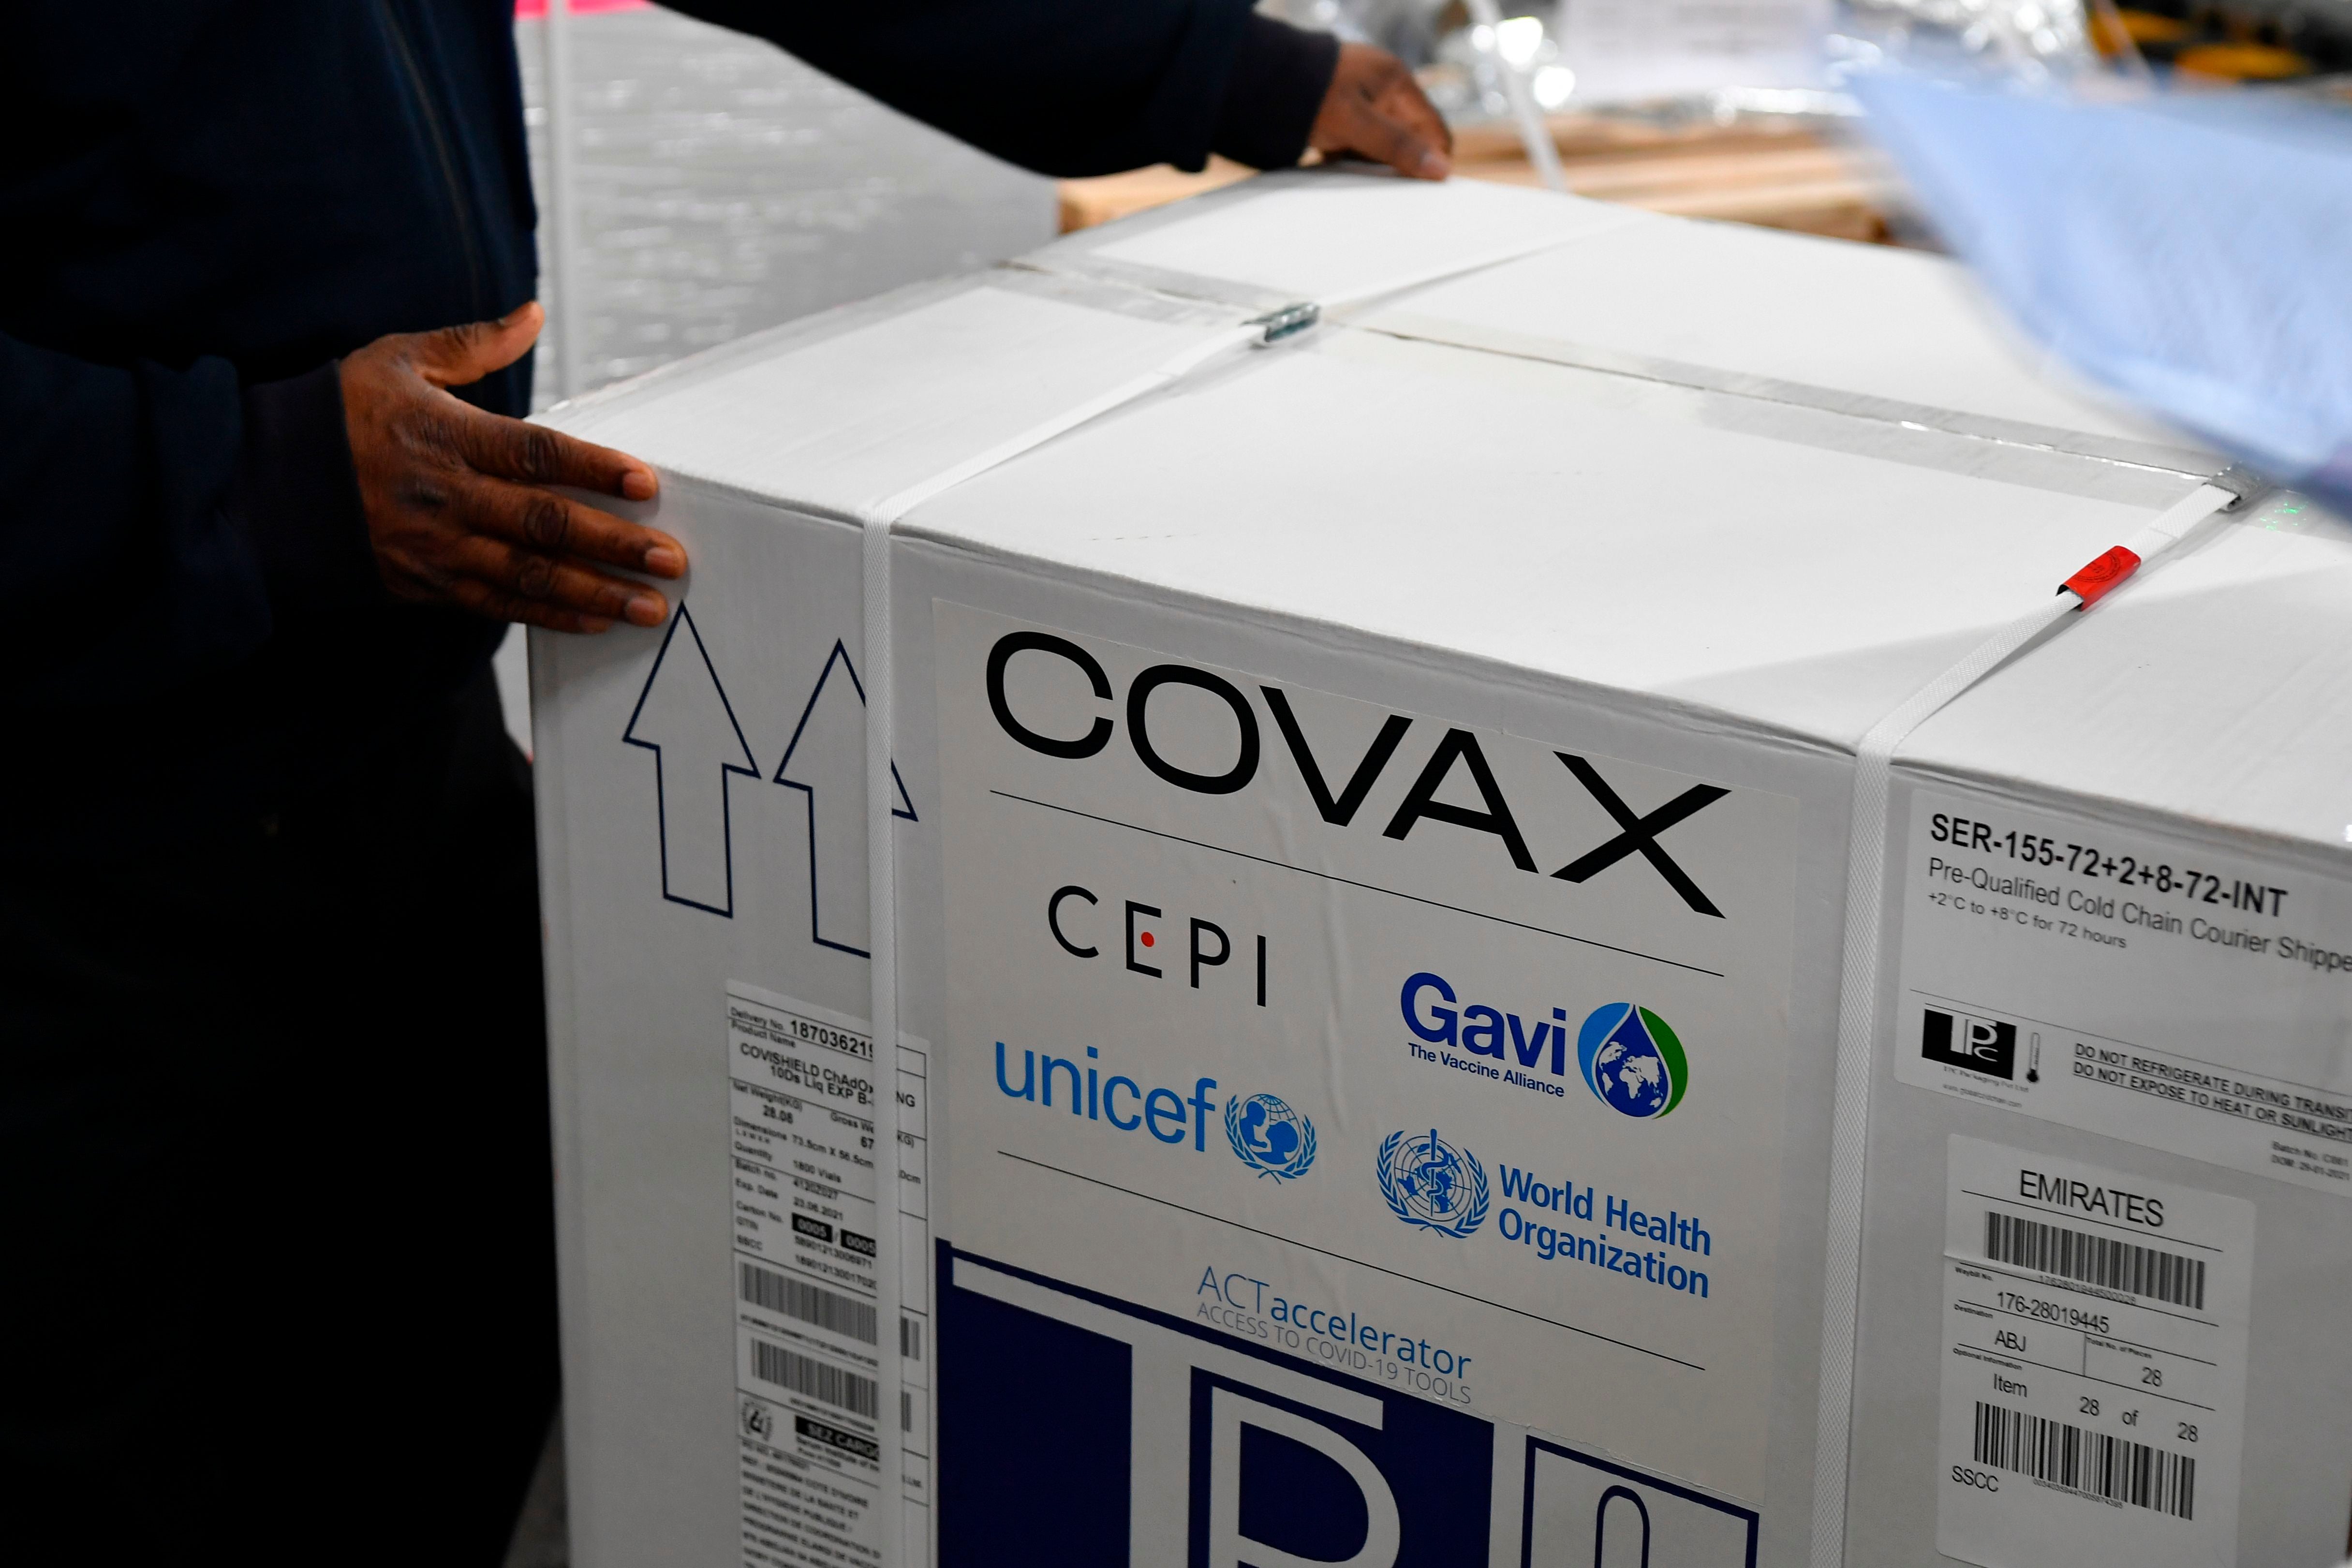 A carton box of a Covishield vaccine developed by Pune based Serum Institute of India (SII) is unloaded at the Mumbai airport on 24 February 2021, as part of the Covax scheme, which aims to procure and distribute inoculations fairly among all nations